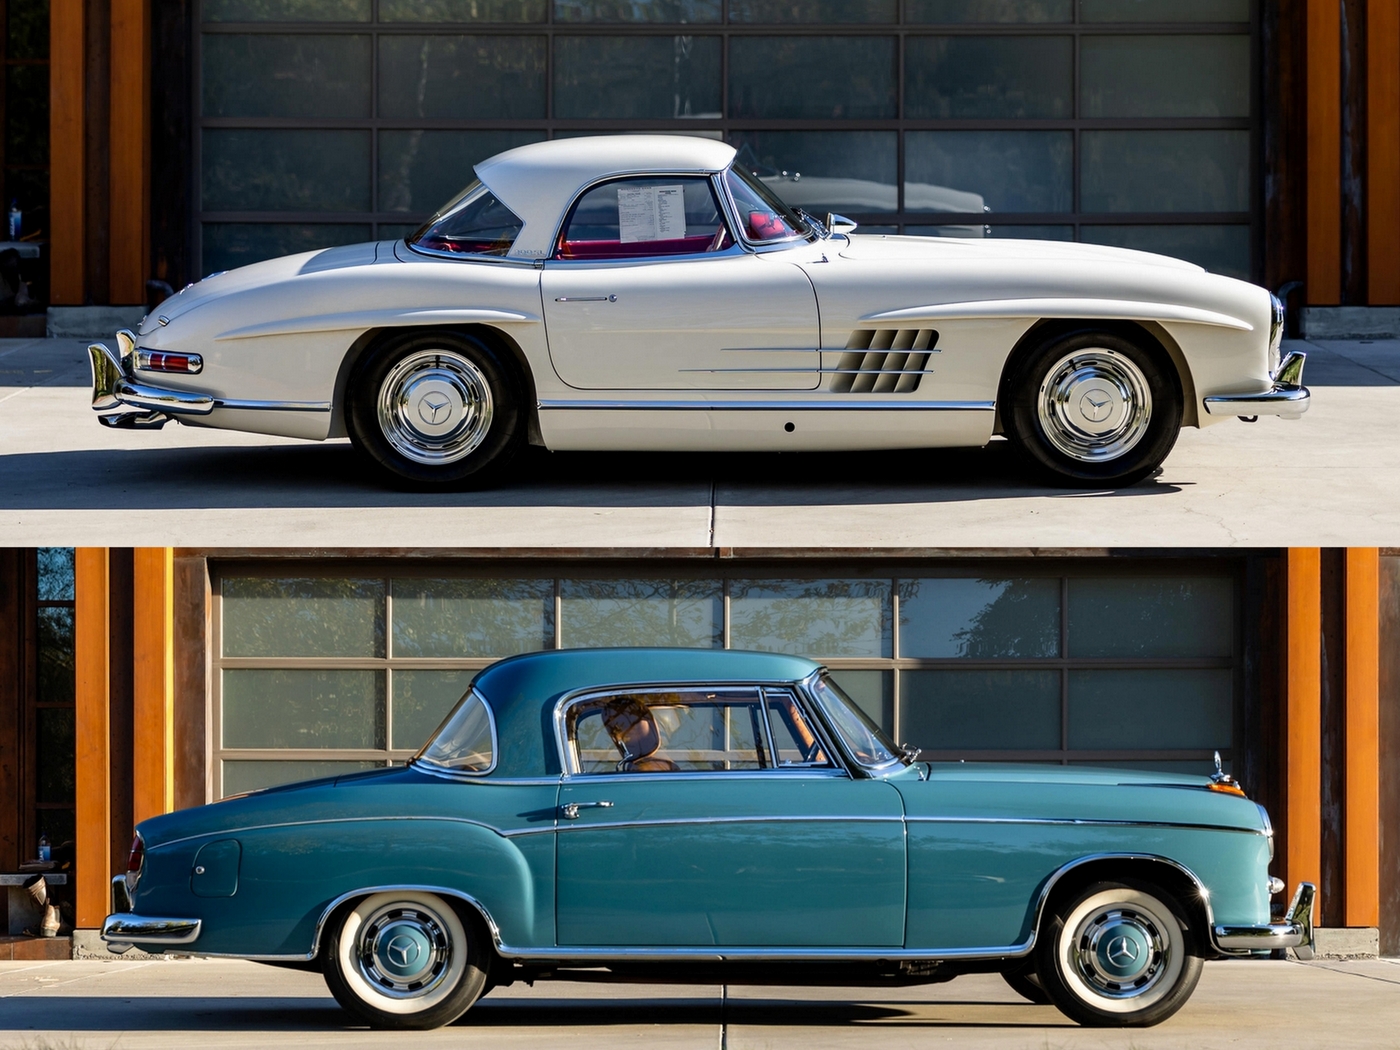 Mercedes-Benz 300 SL Roadster and Mercedes-Benz 220 S Coupe